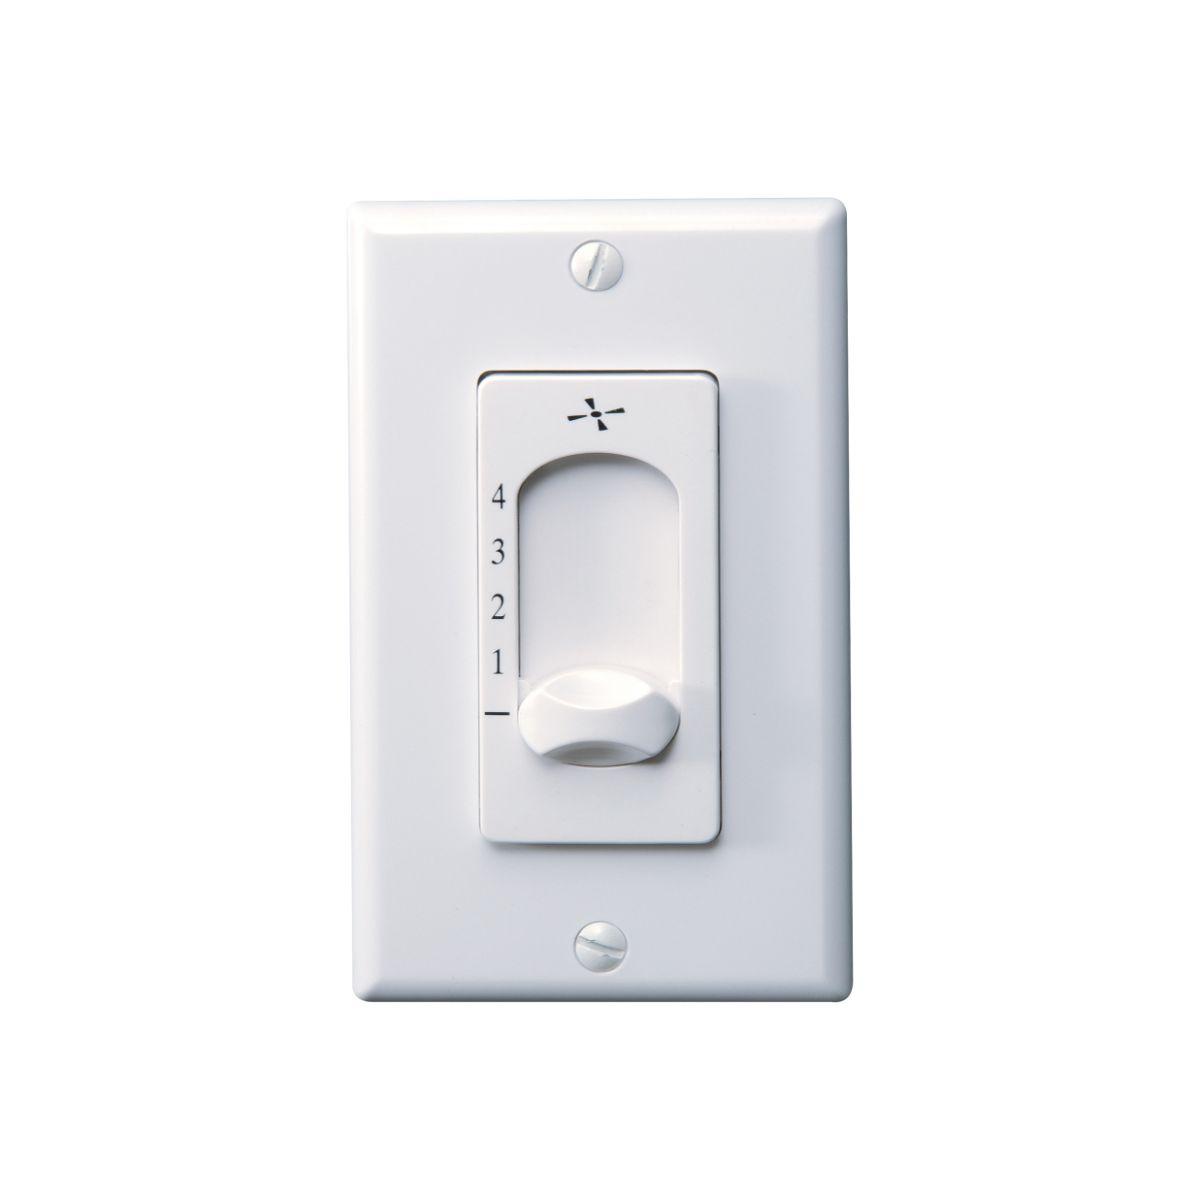 4-Speed Ceiling Fan Wall Control, White Finish - Bees Lighting